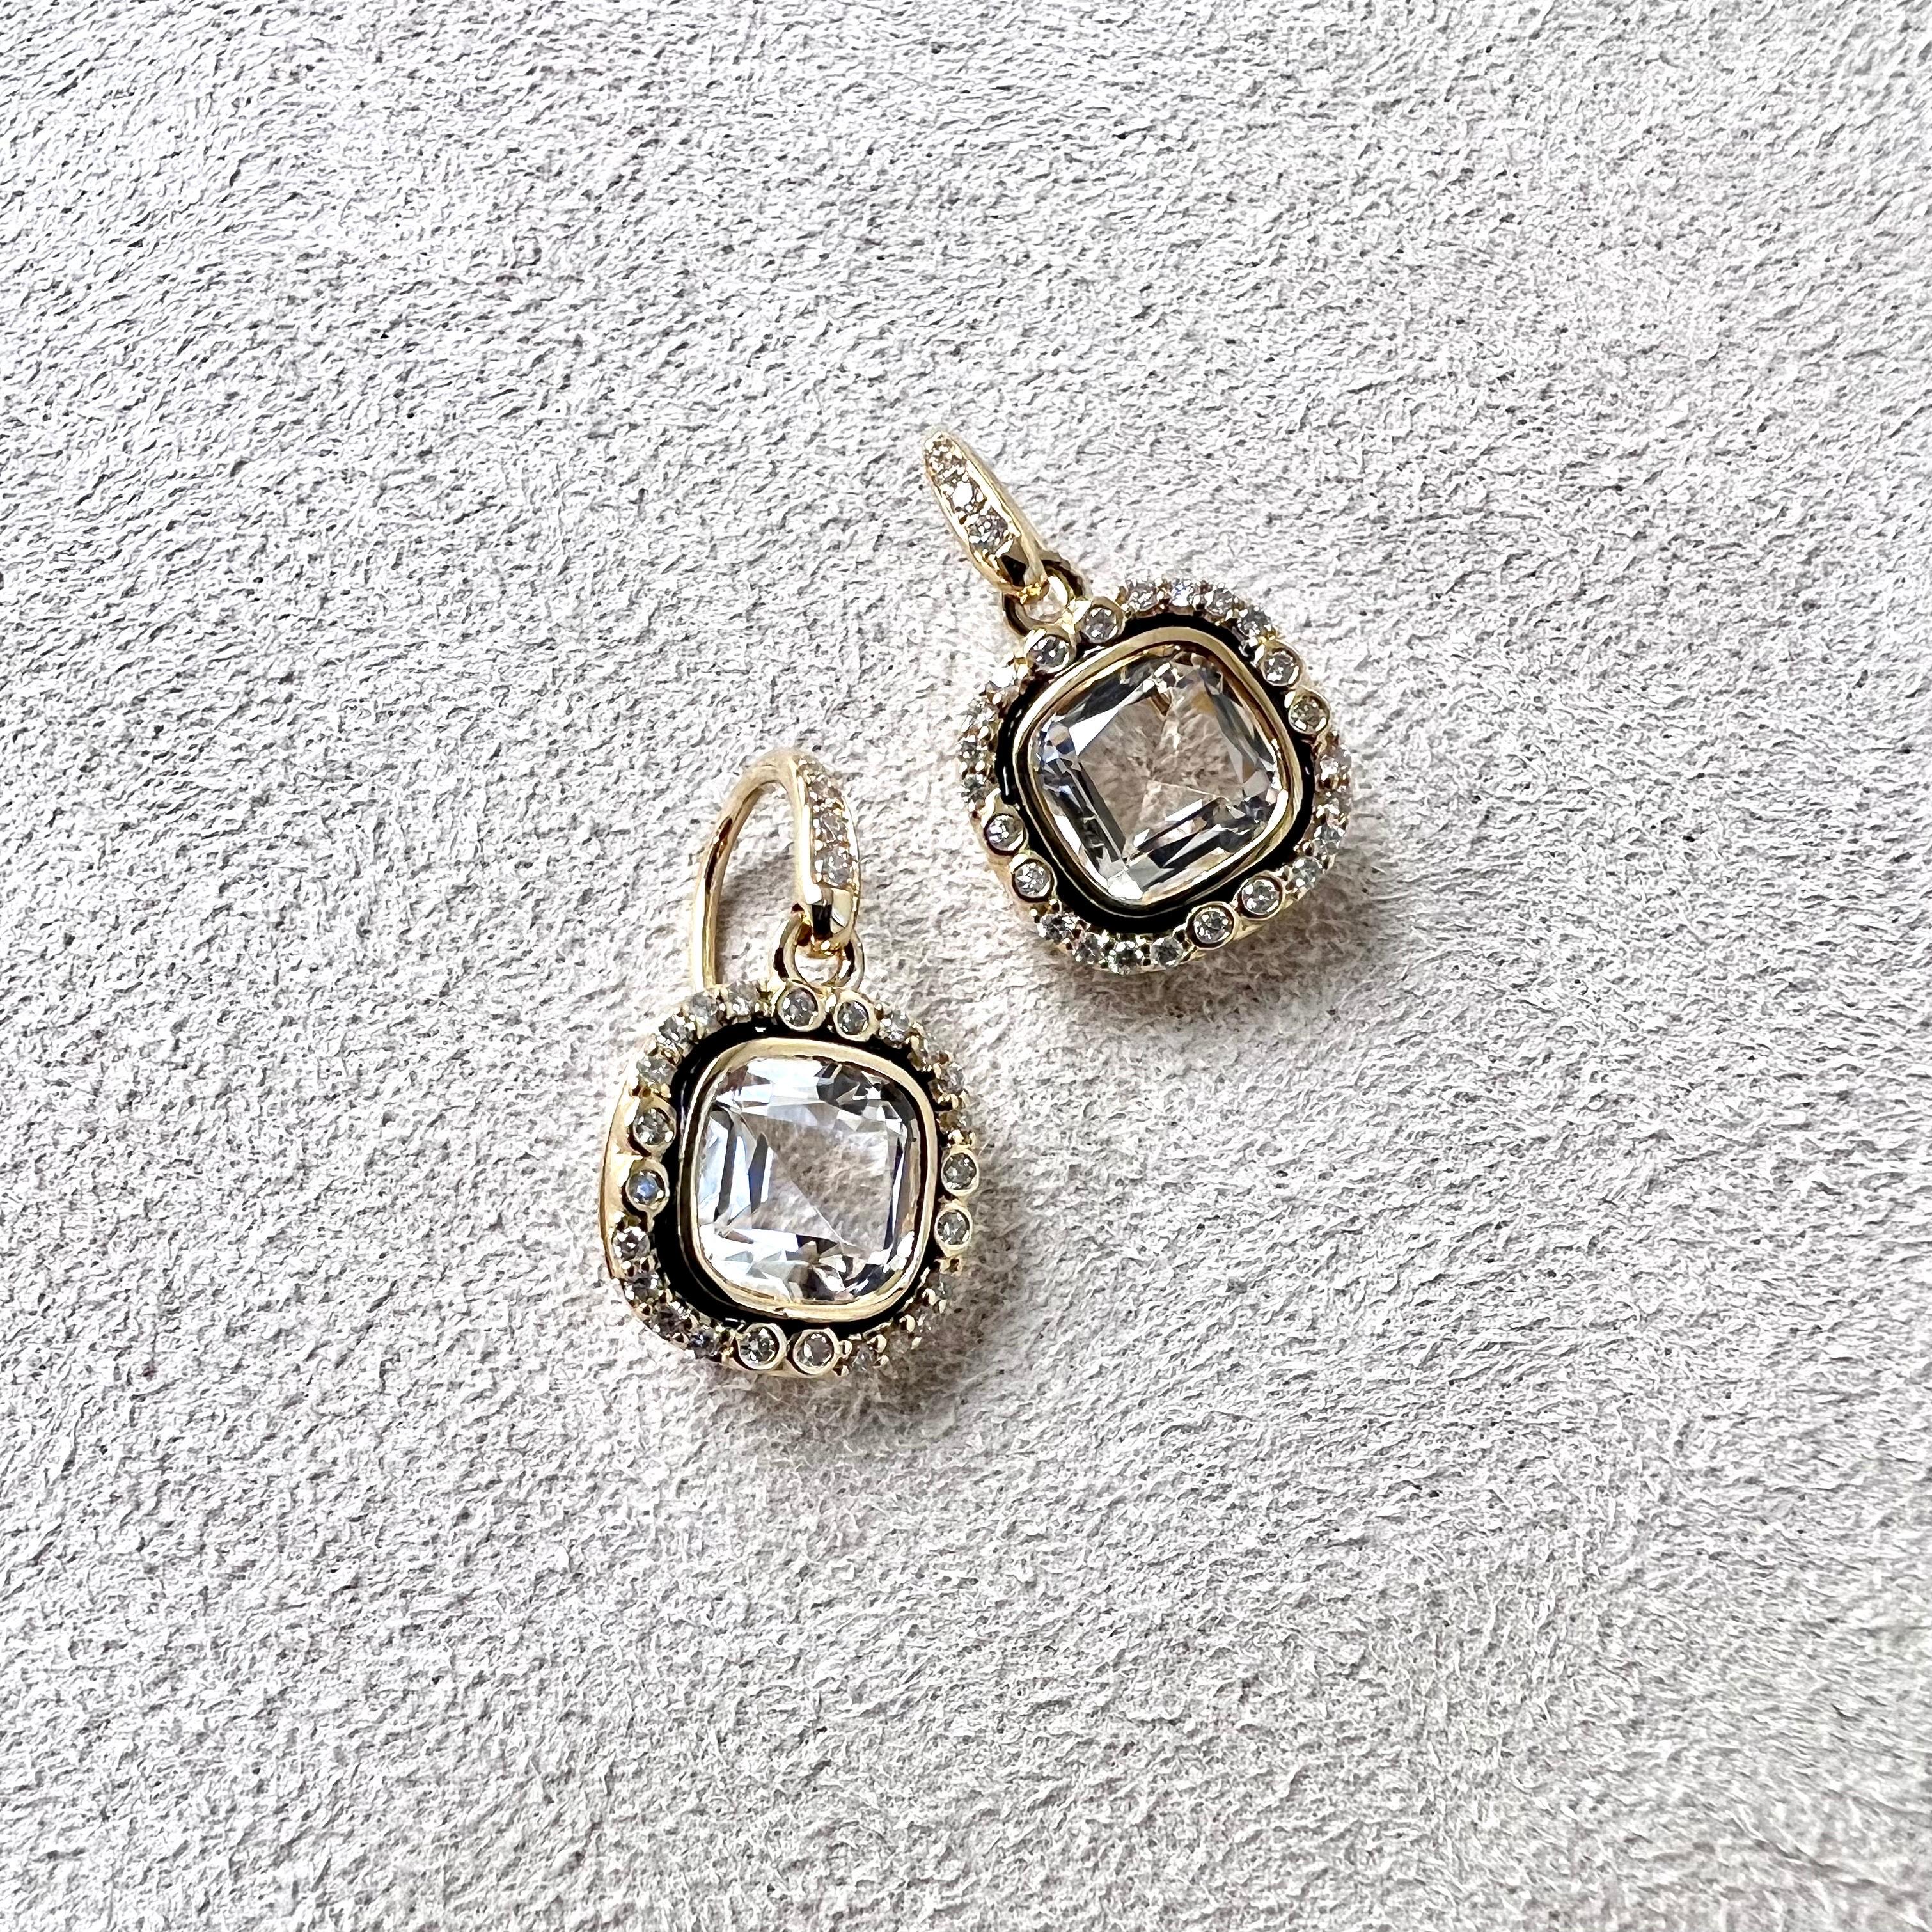 Created in 18 karat yellow gold
Rock crystal 2.50 carats approx.
Diamonds 0.25 carat approx.
Black enamel details
French wire for pierced ears
Limited edition

Expertly crafted in 18 karat yellow gold, this limited edition pair of earrings features